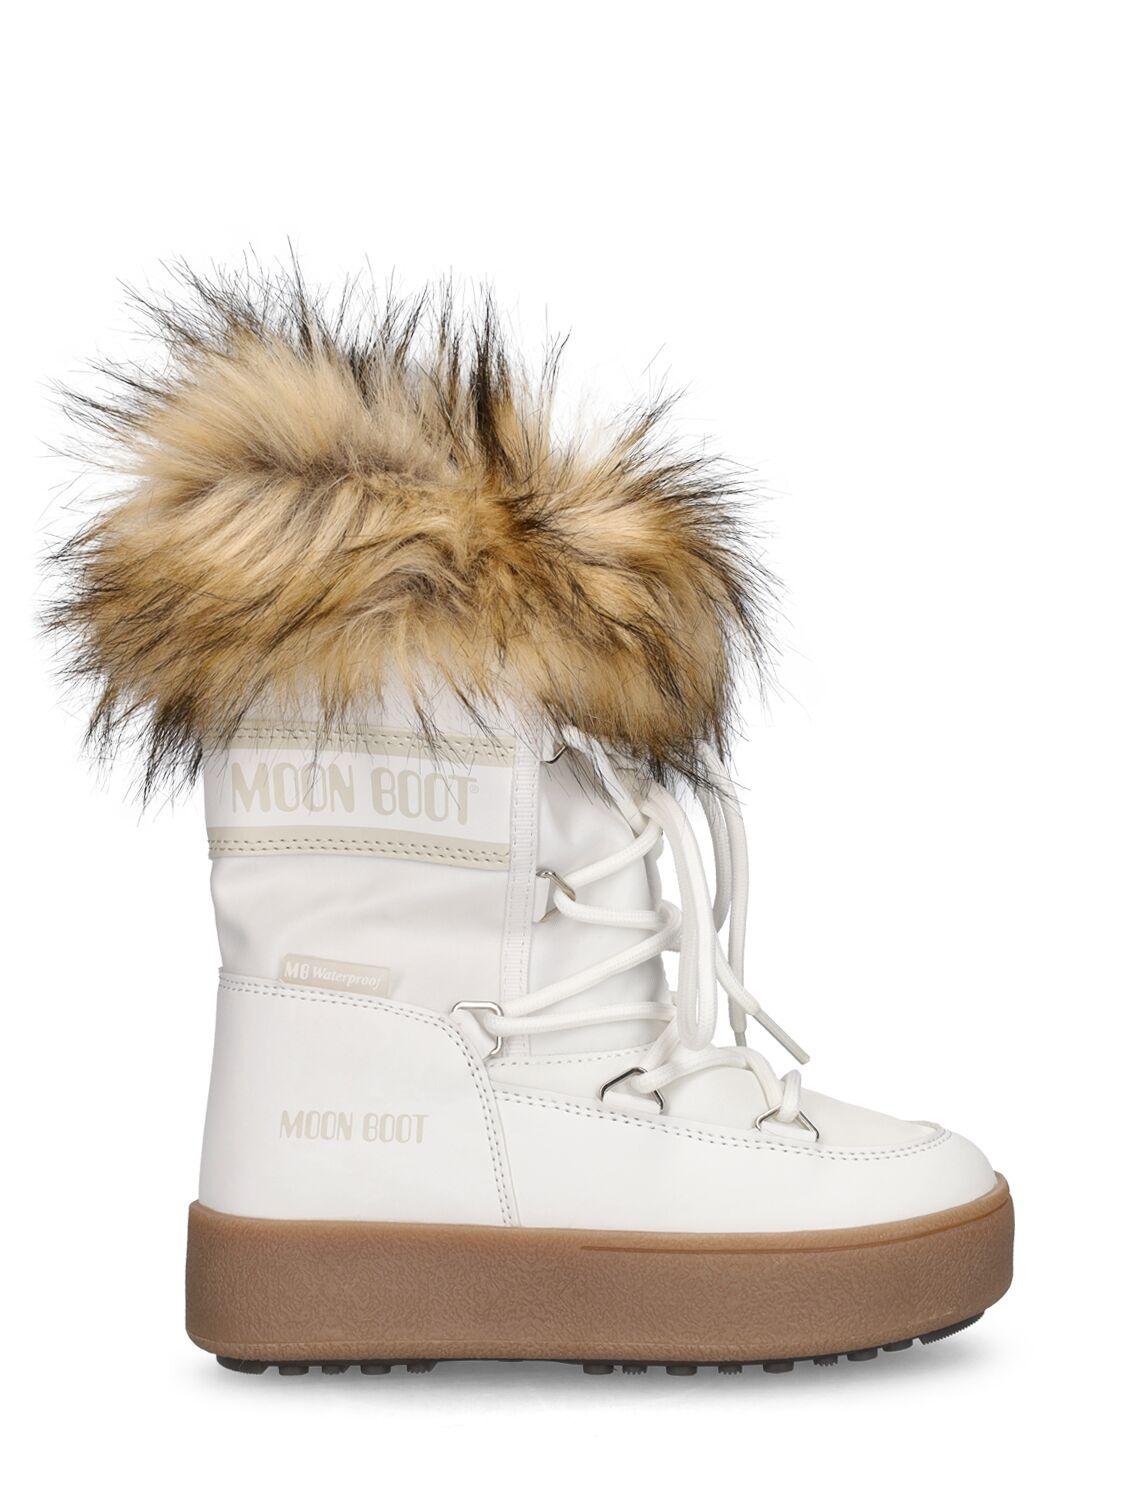 Nylon Ankle Snow Boots W/ Faux Fur by MOON BOOT